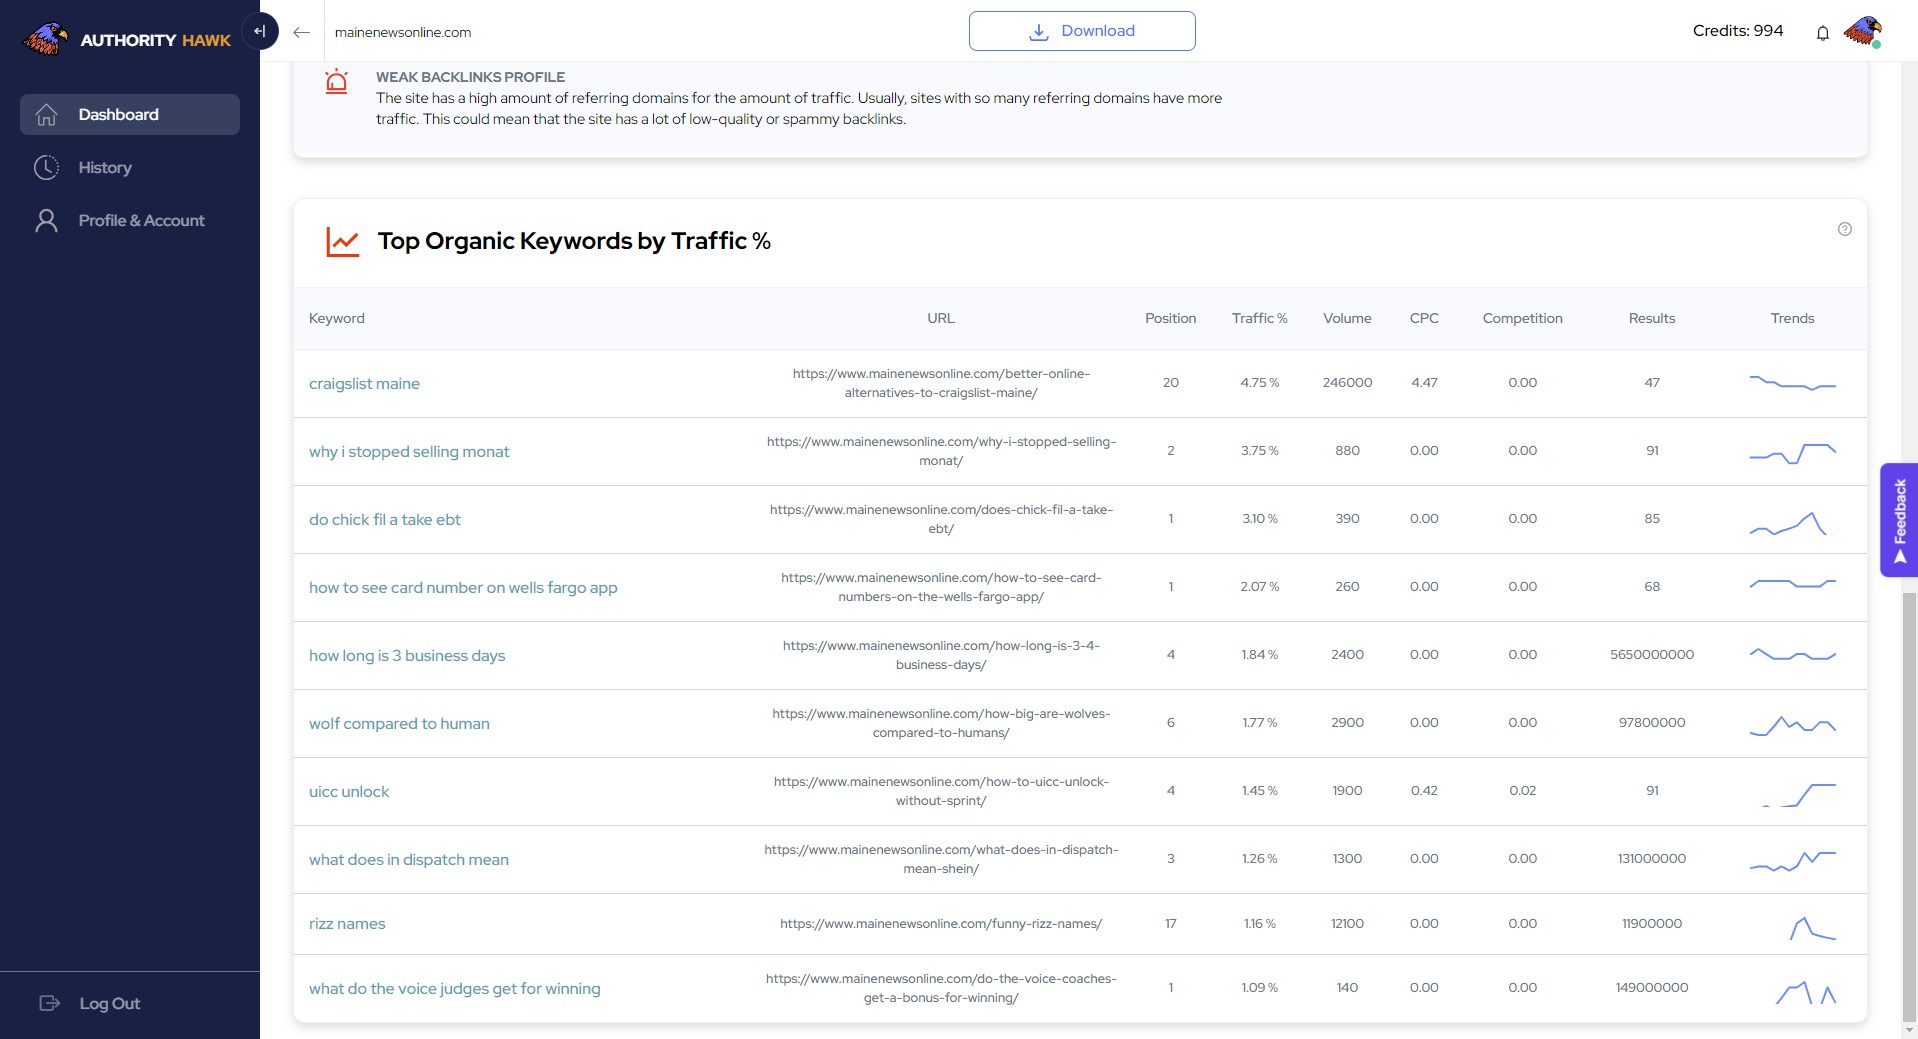 Click on "Top Organic Keywords by Traffic %"